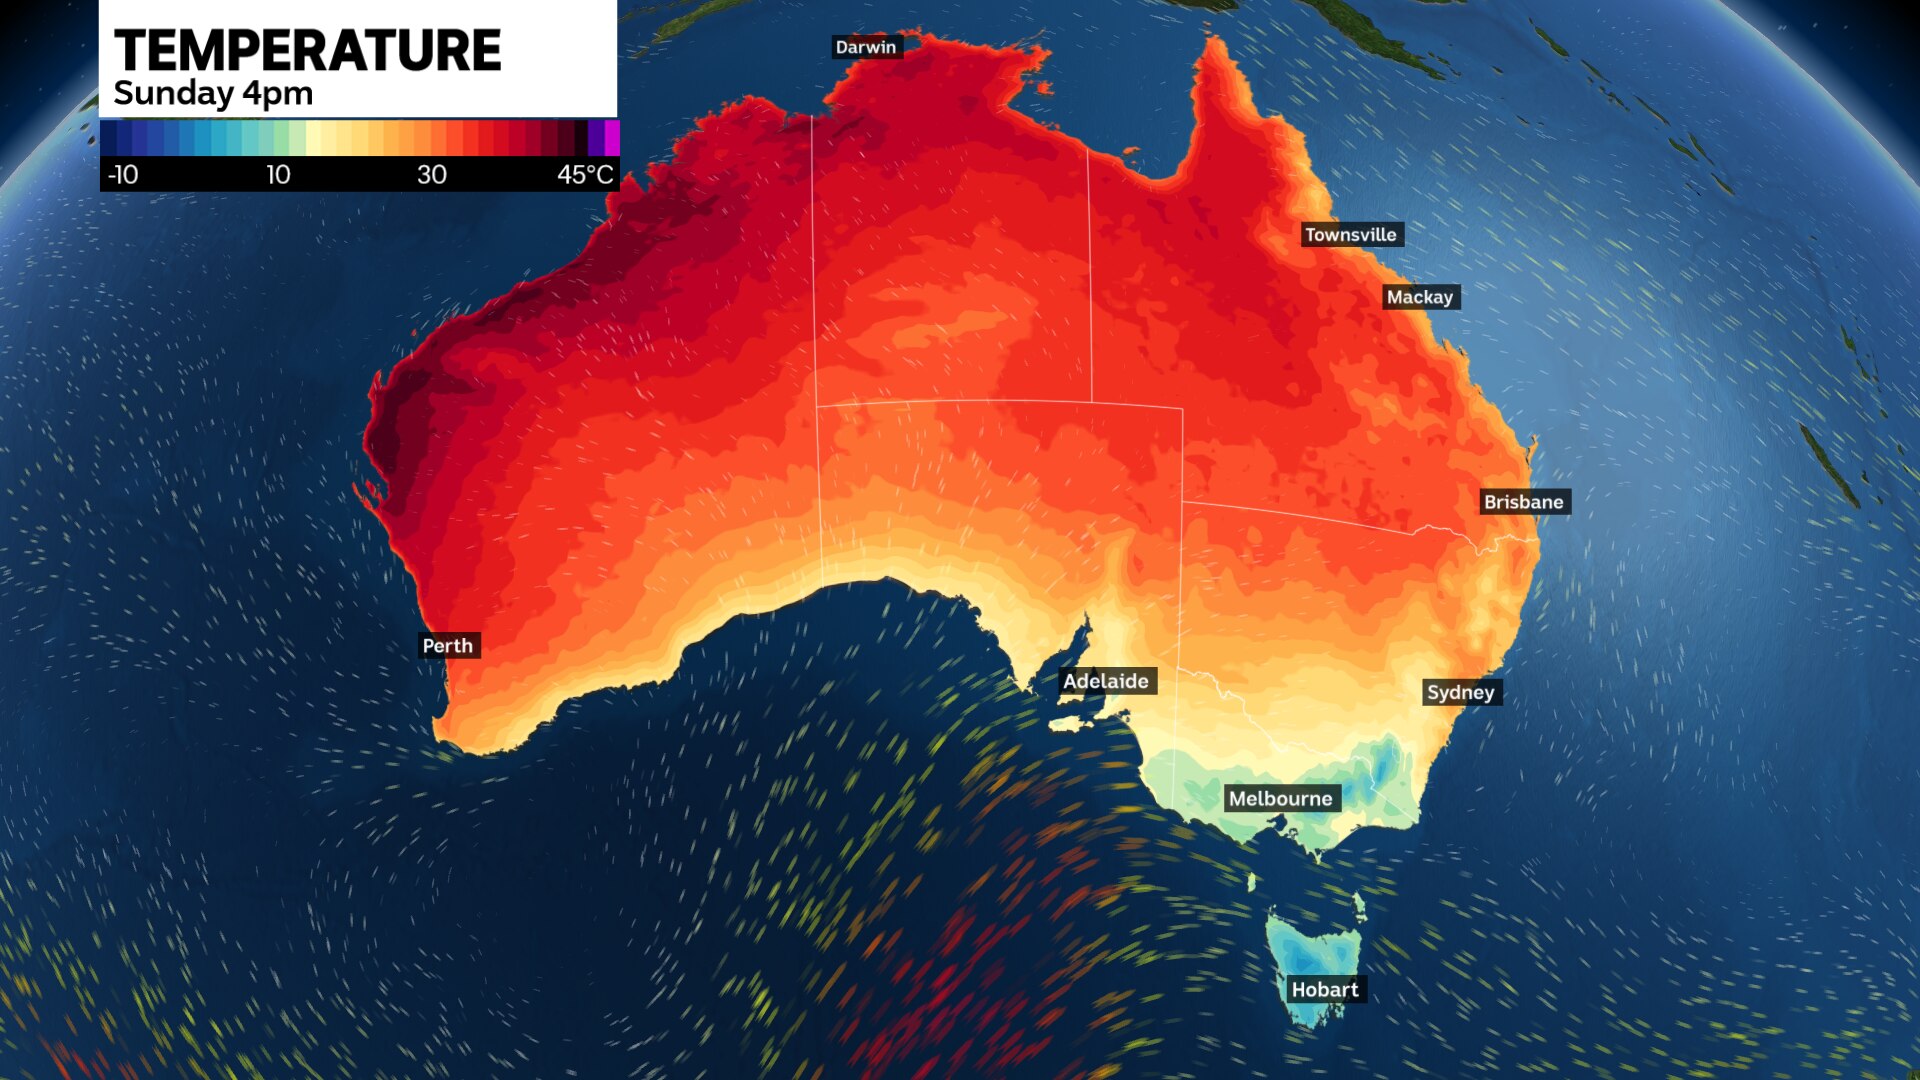 A map of Australia showing red colours across the continent for high heats, with a small pocket of blue around Melbourne